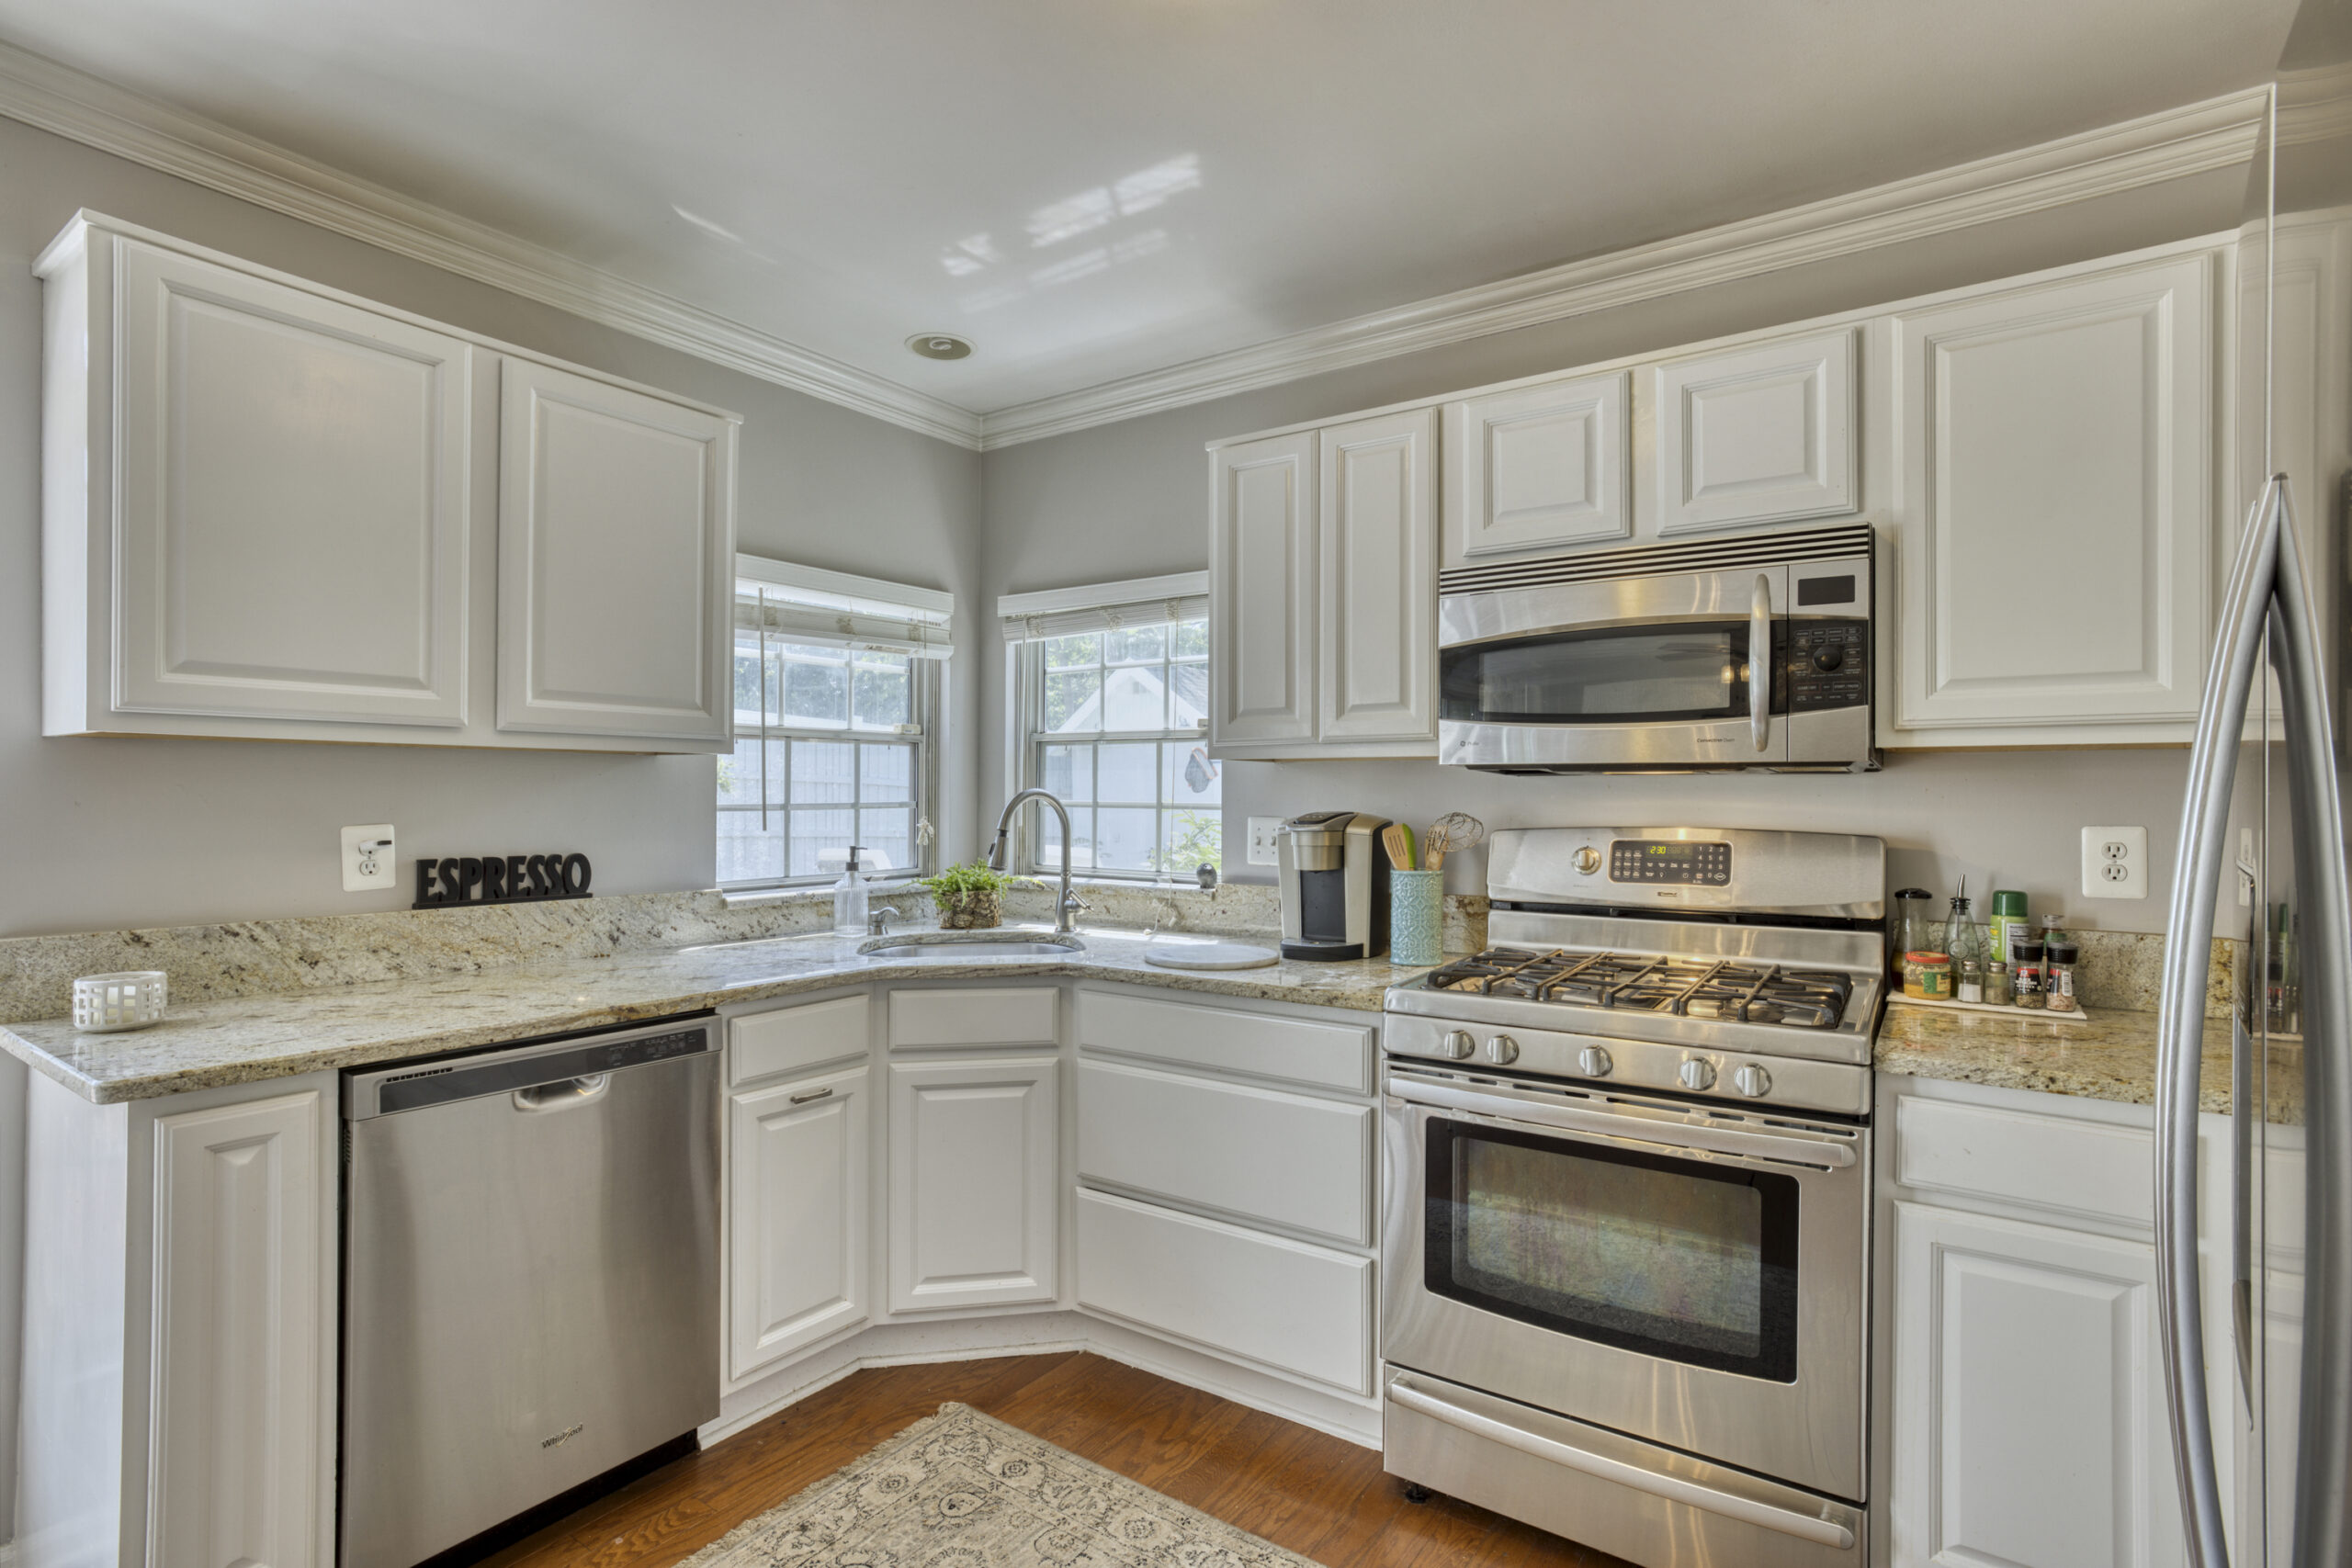 Professional interior photo of 12309 Stalwart Court - showing the kitchen with white cabinets, cream granite counters and stainless appliances